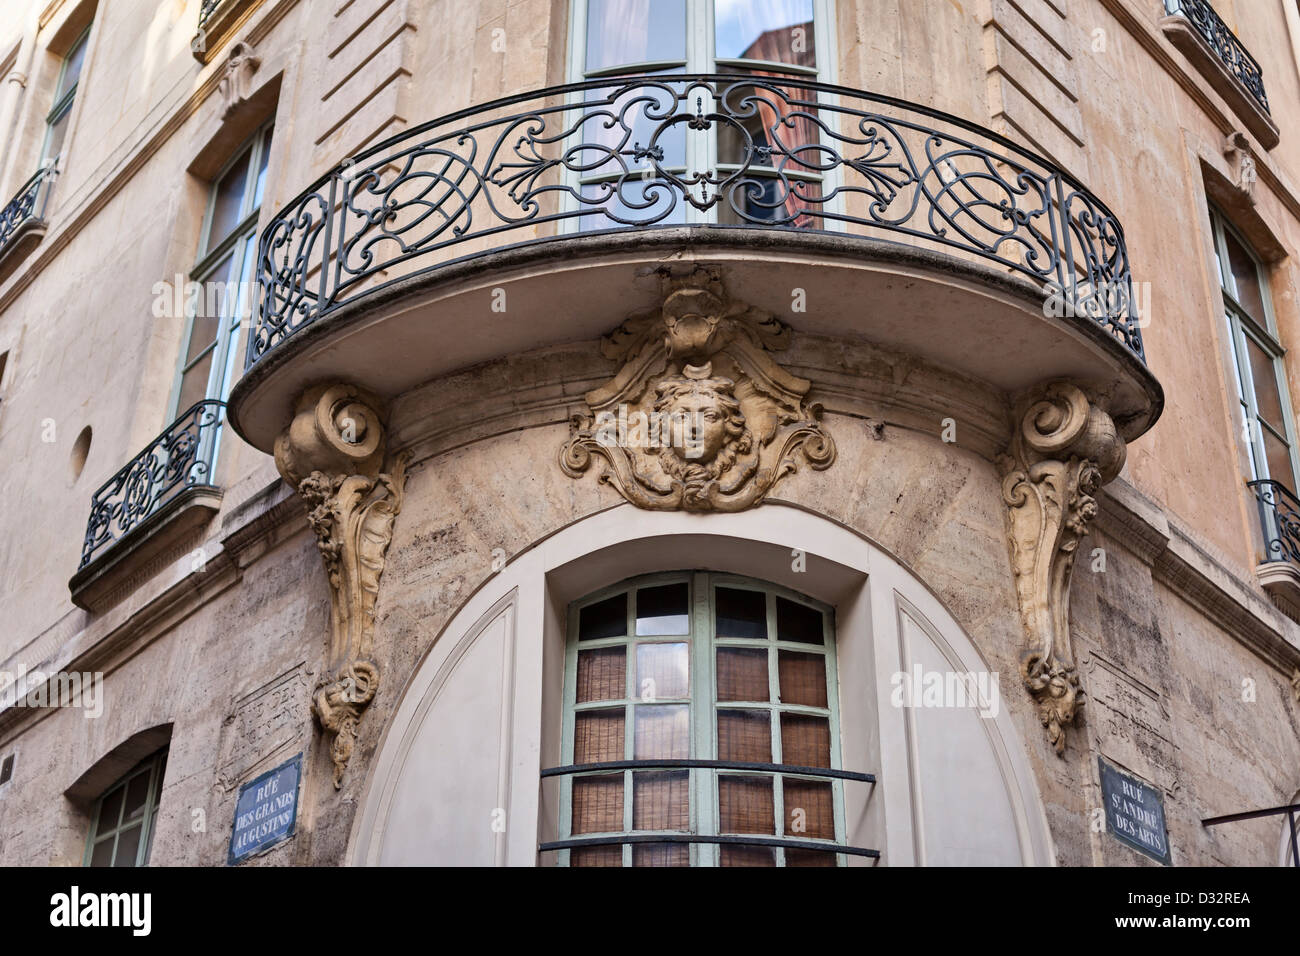 Ornate balcony at the junction of Rue des Grands Augustins and Rue Saint-André des Arts, Paris, France Stock Photo